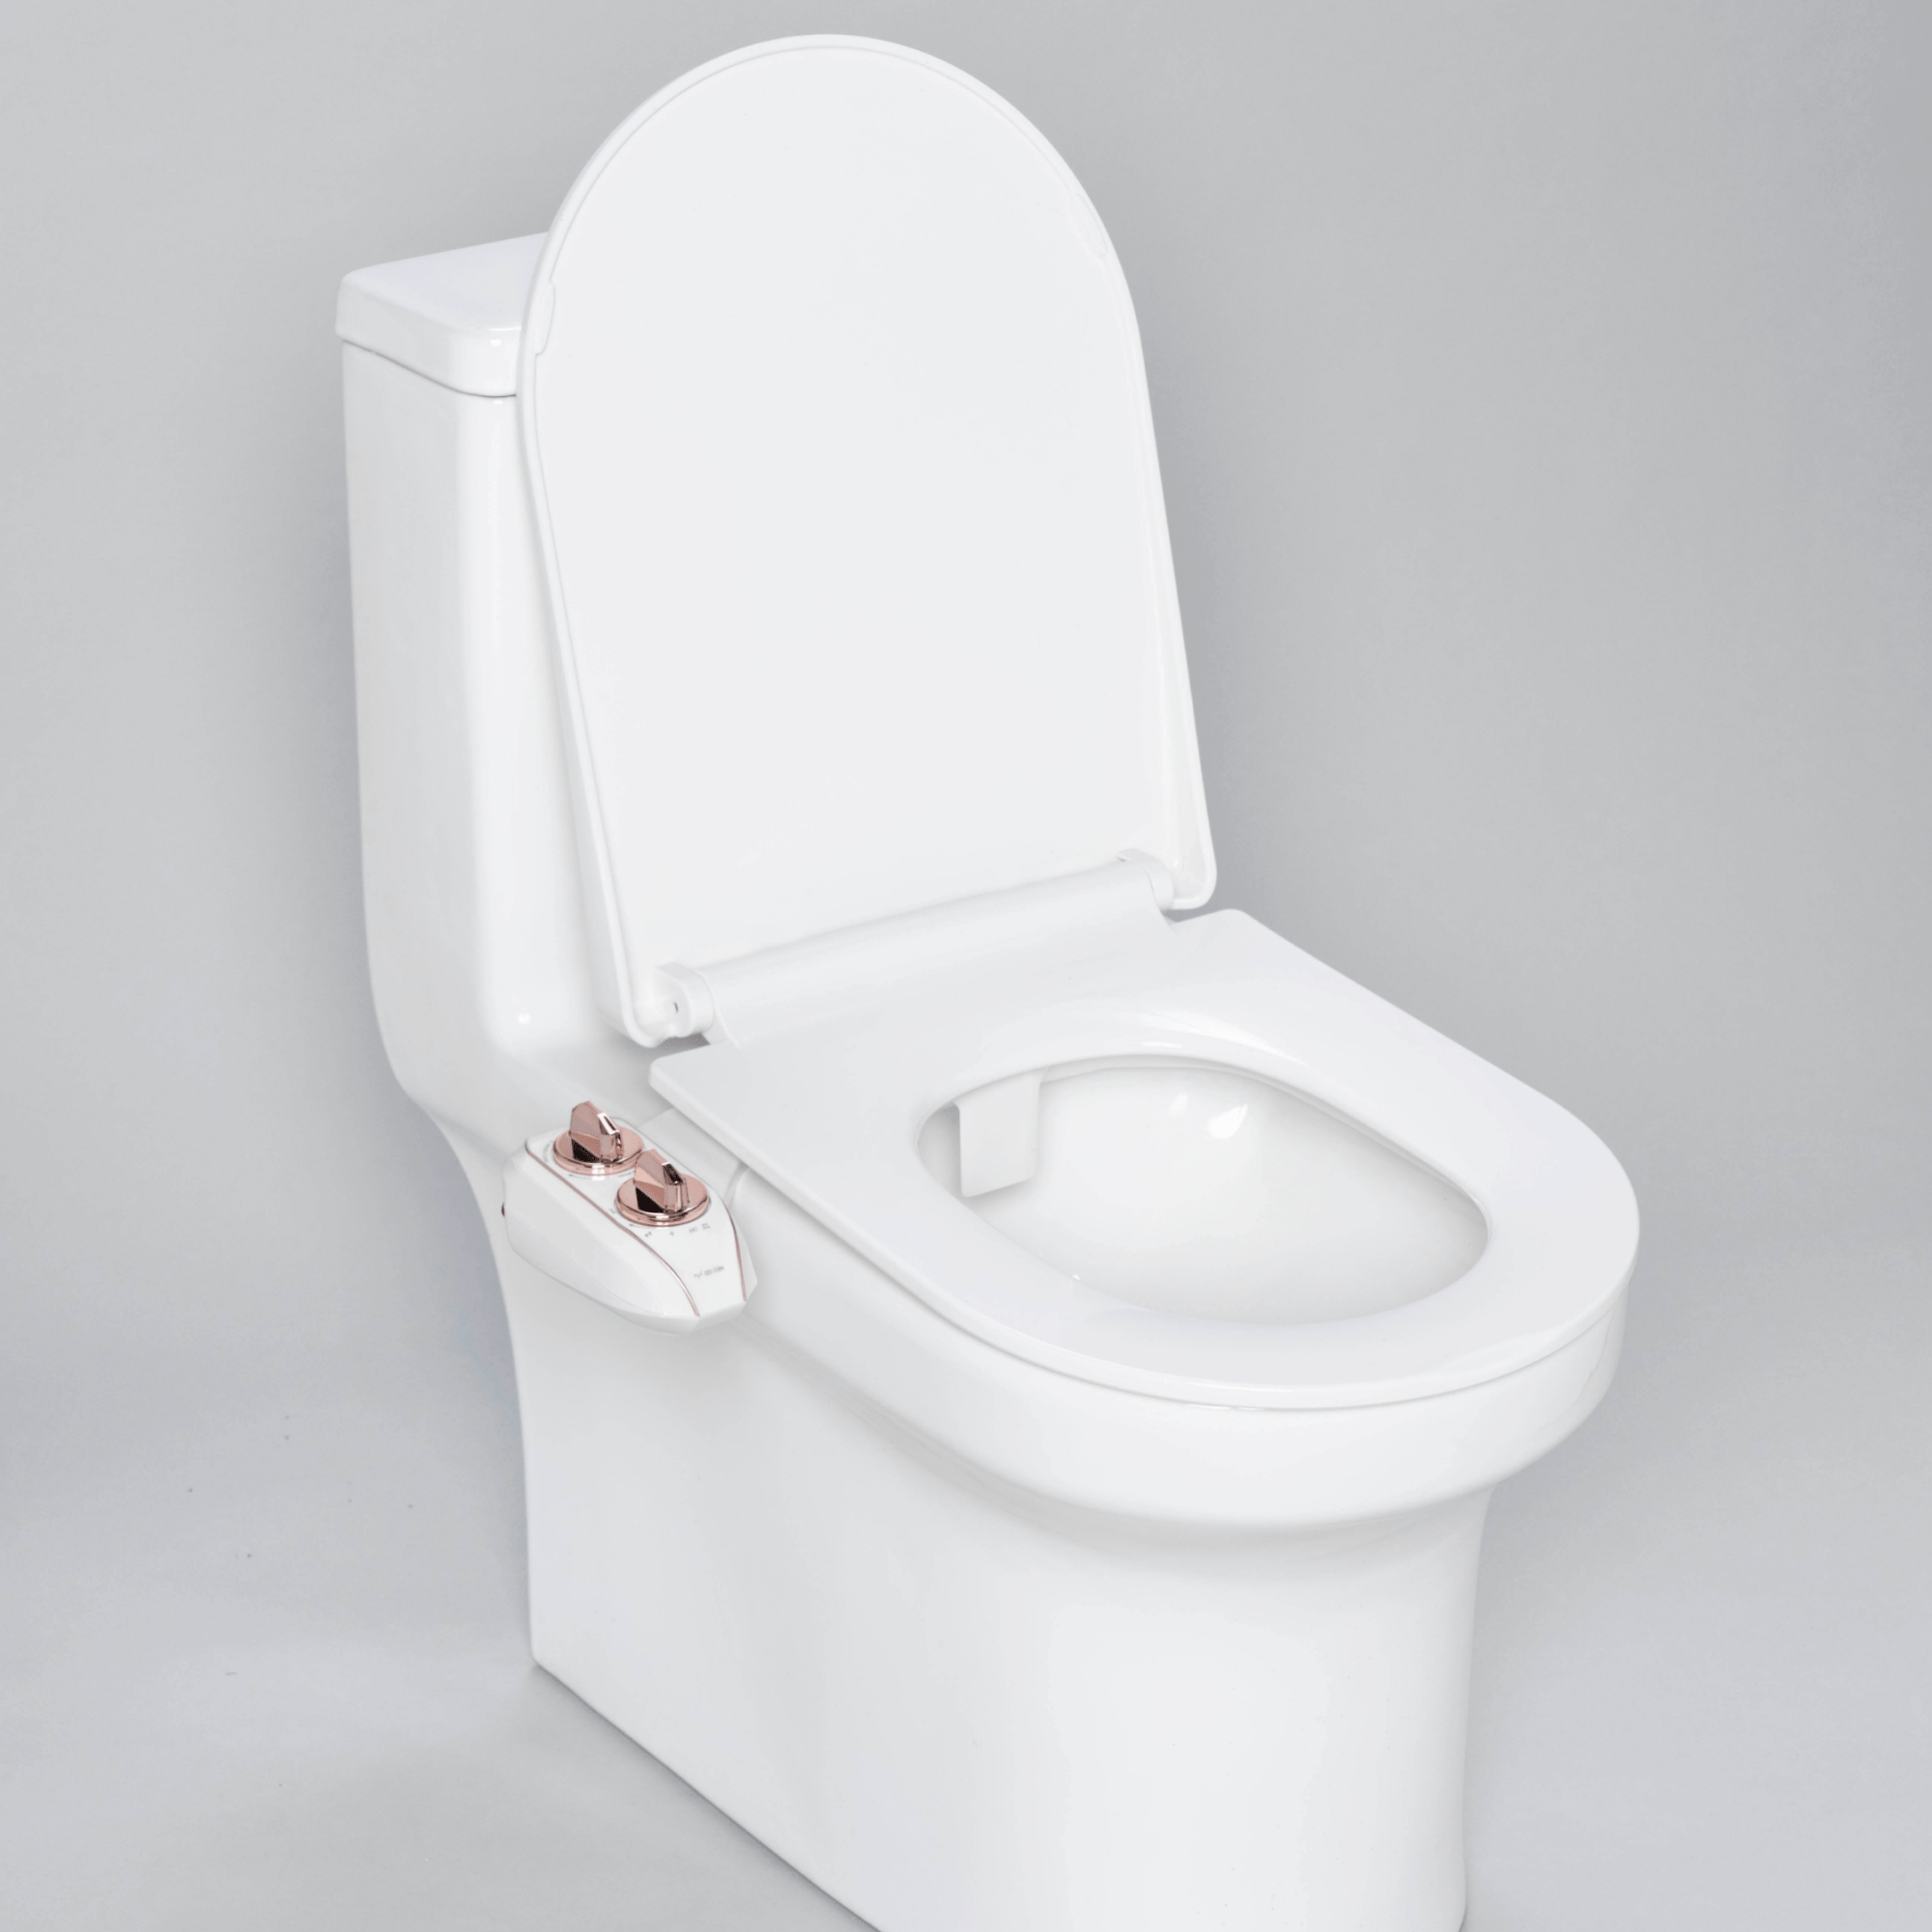 NEO 120 Plus: Imperfect Packaging - NEO 120 Plus Rose Gold installed on a modern toilet, with lid open